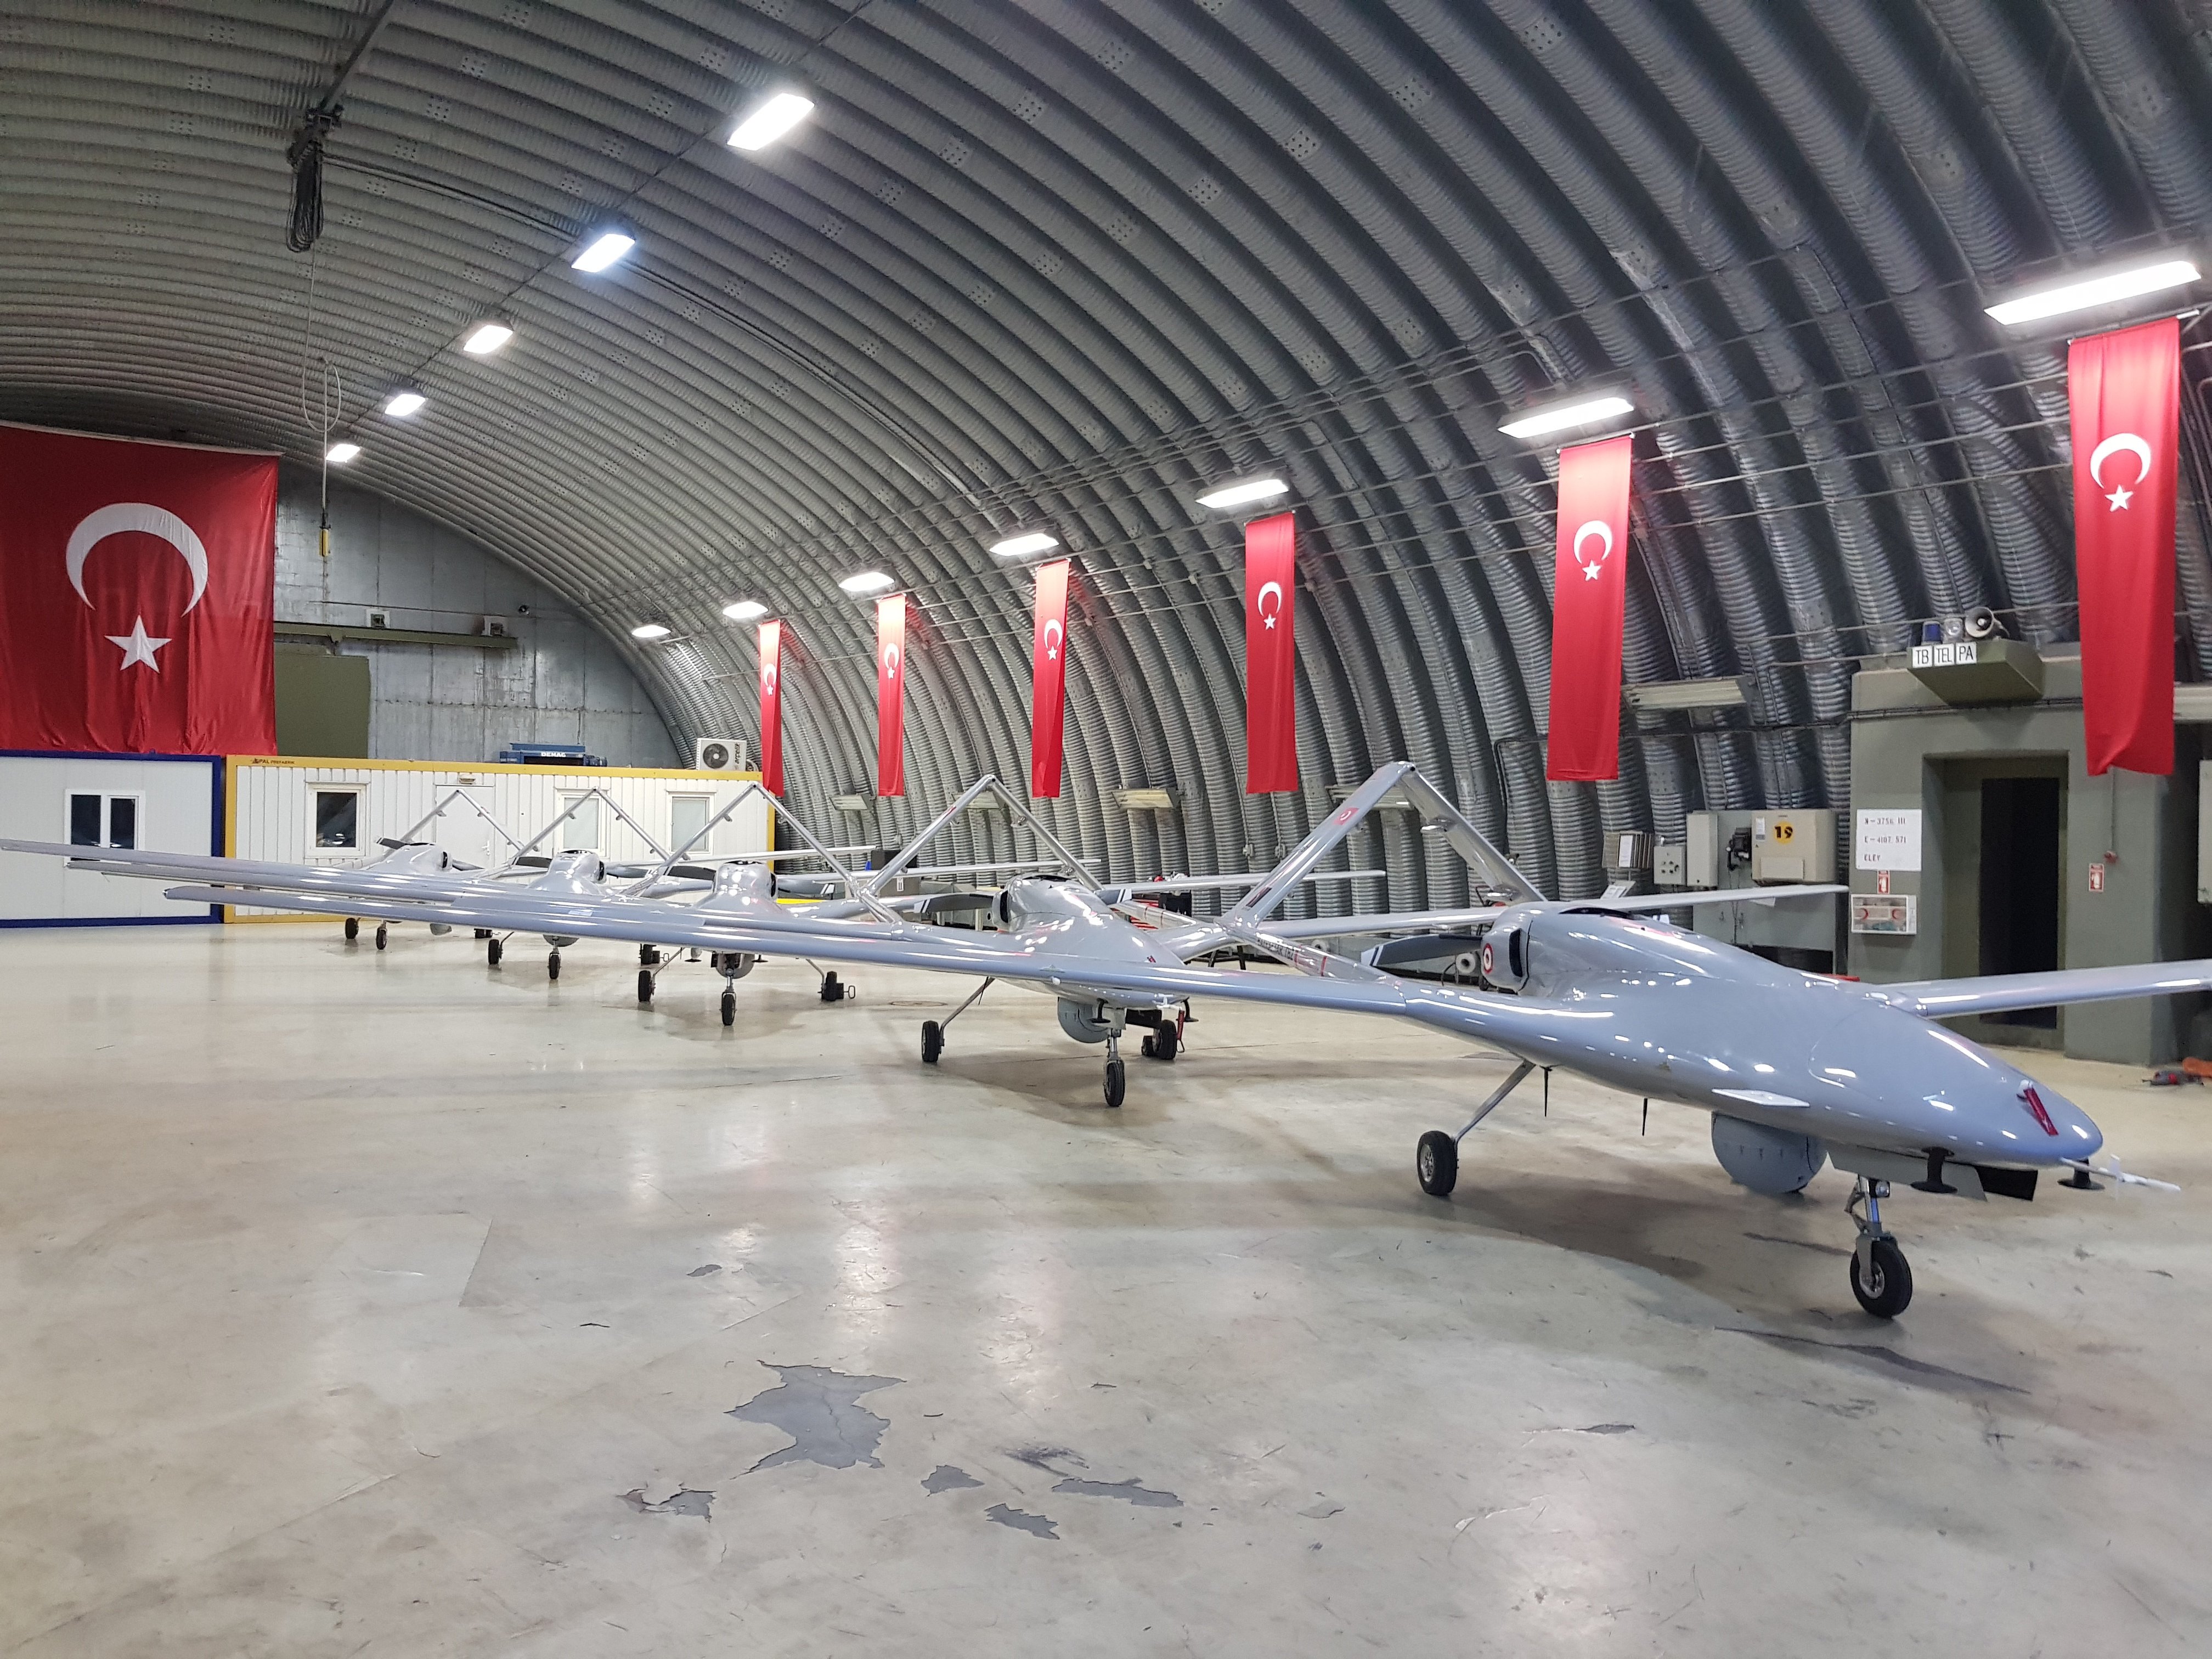 Turkey to build drone base in eastern Erzurum province | Daily Sabah